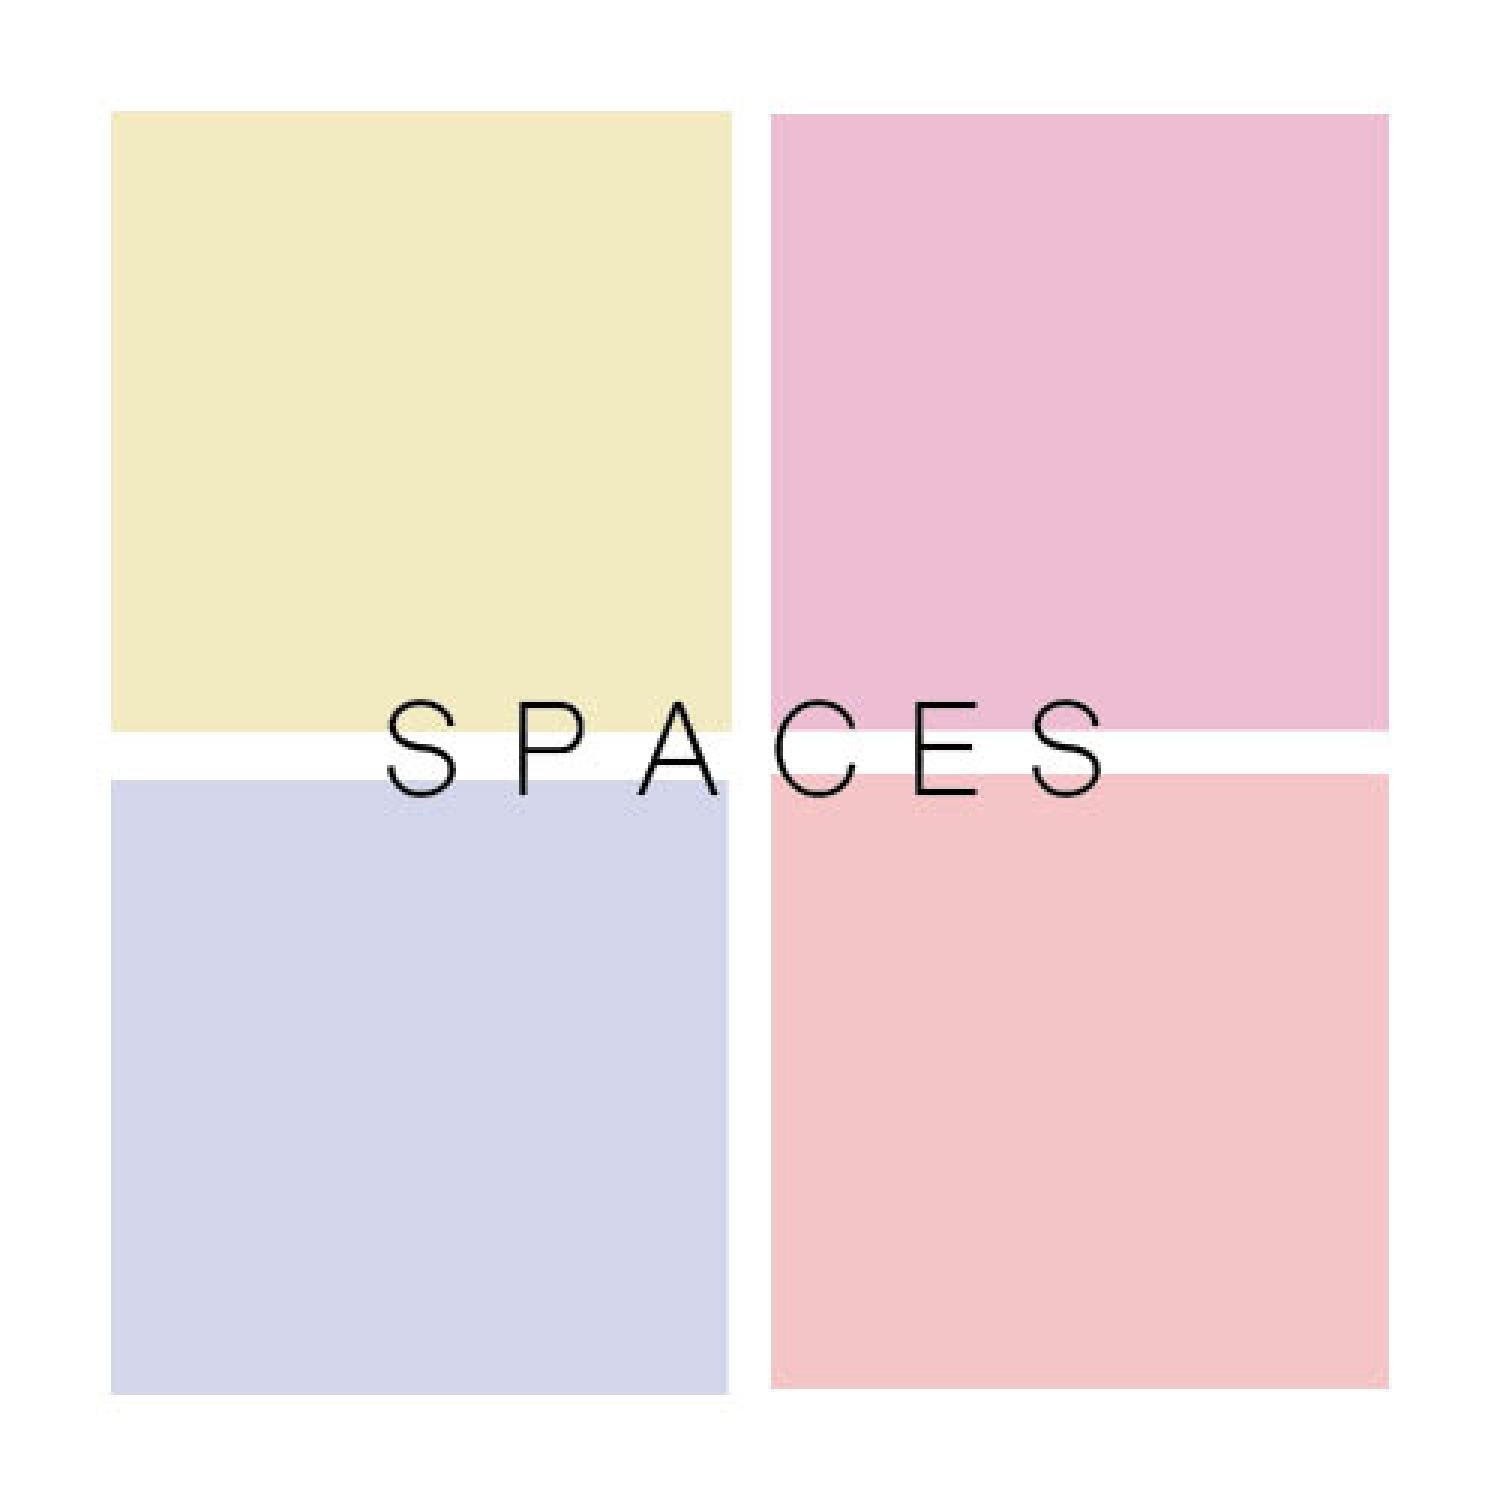 Photo-book cover titled "spaces"